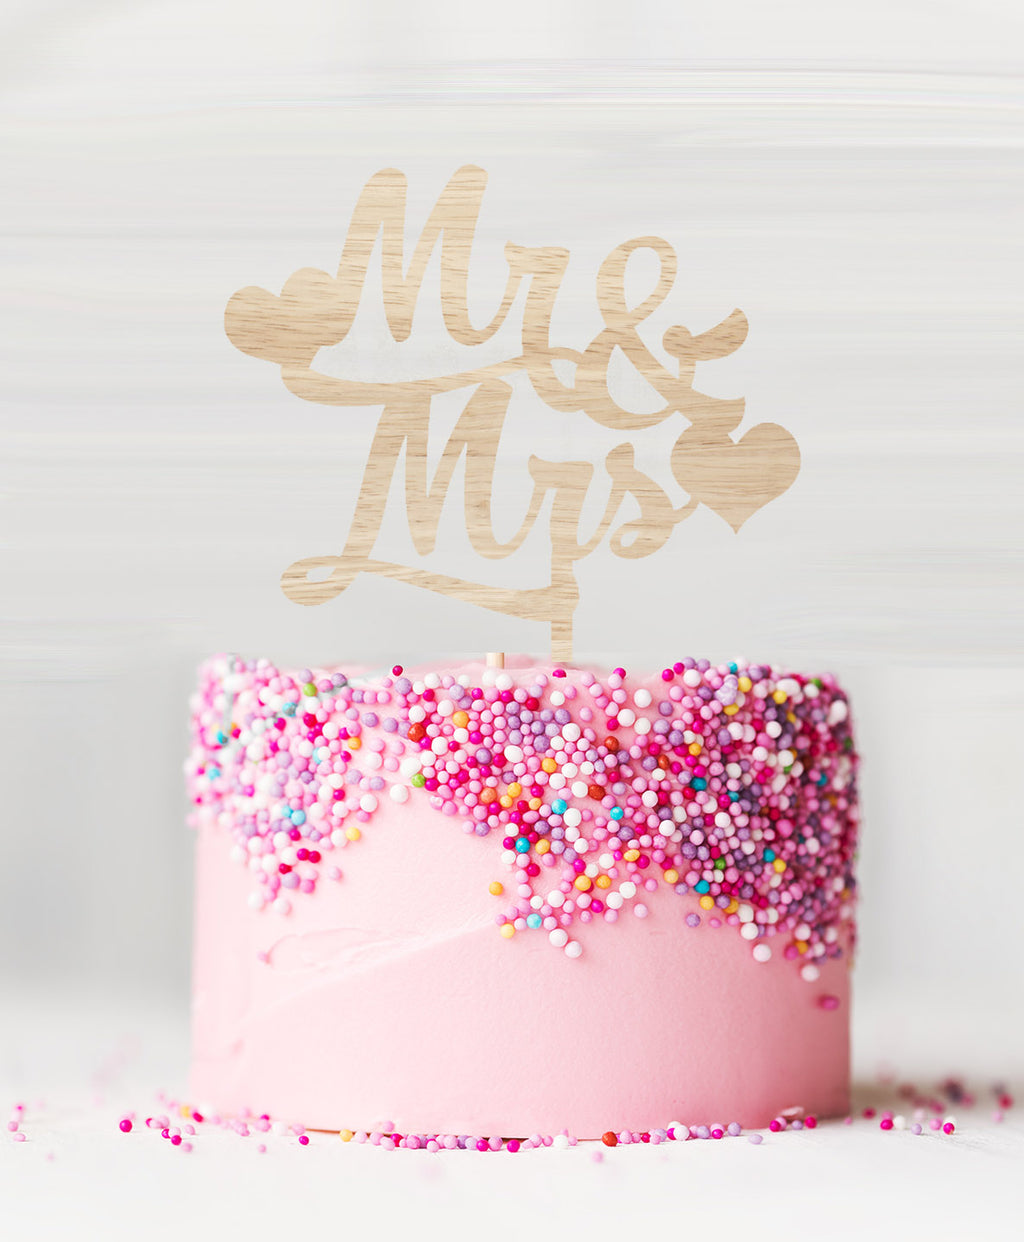 Mr and Mrs with Hearts Birch Wood Cake Topper 